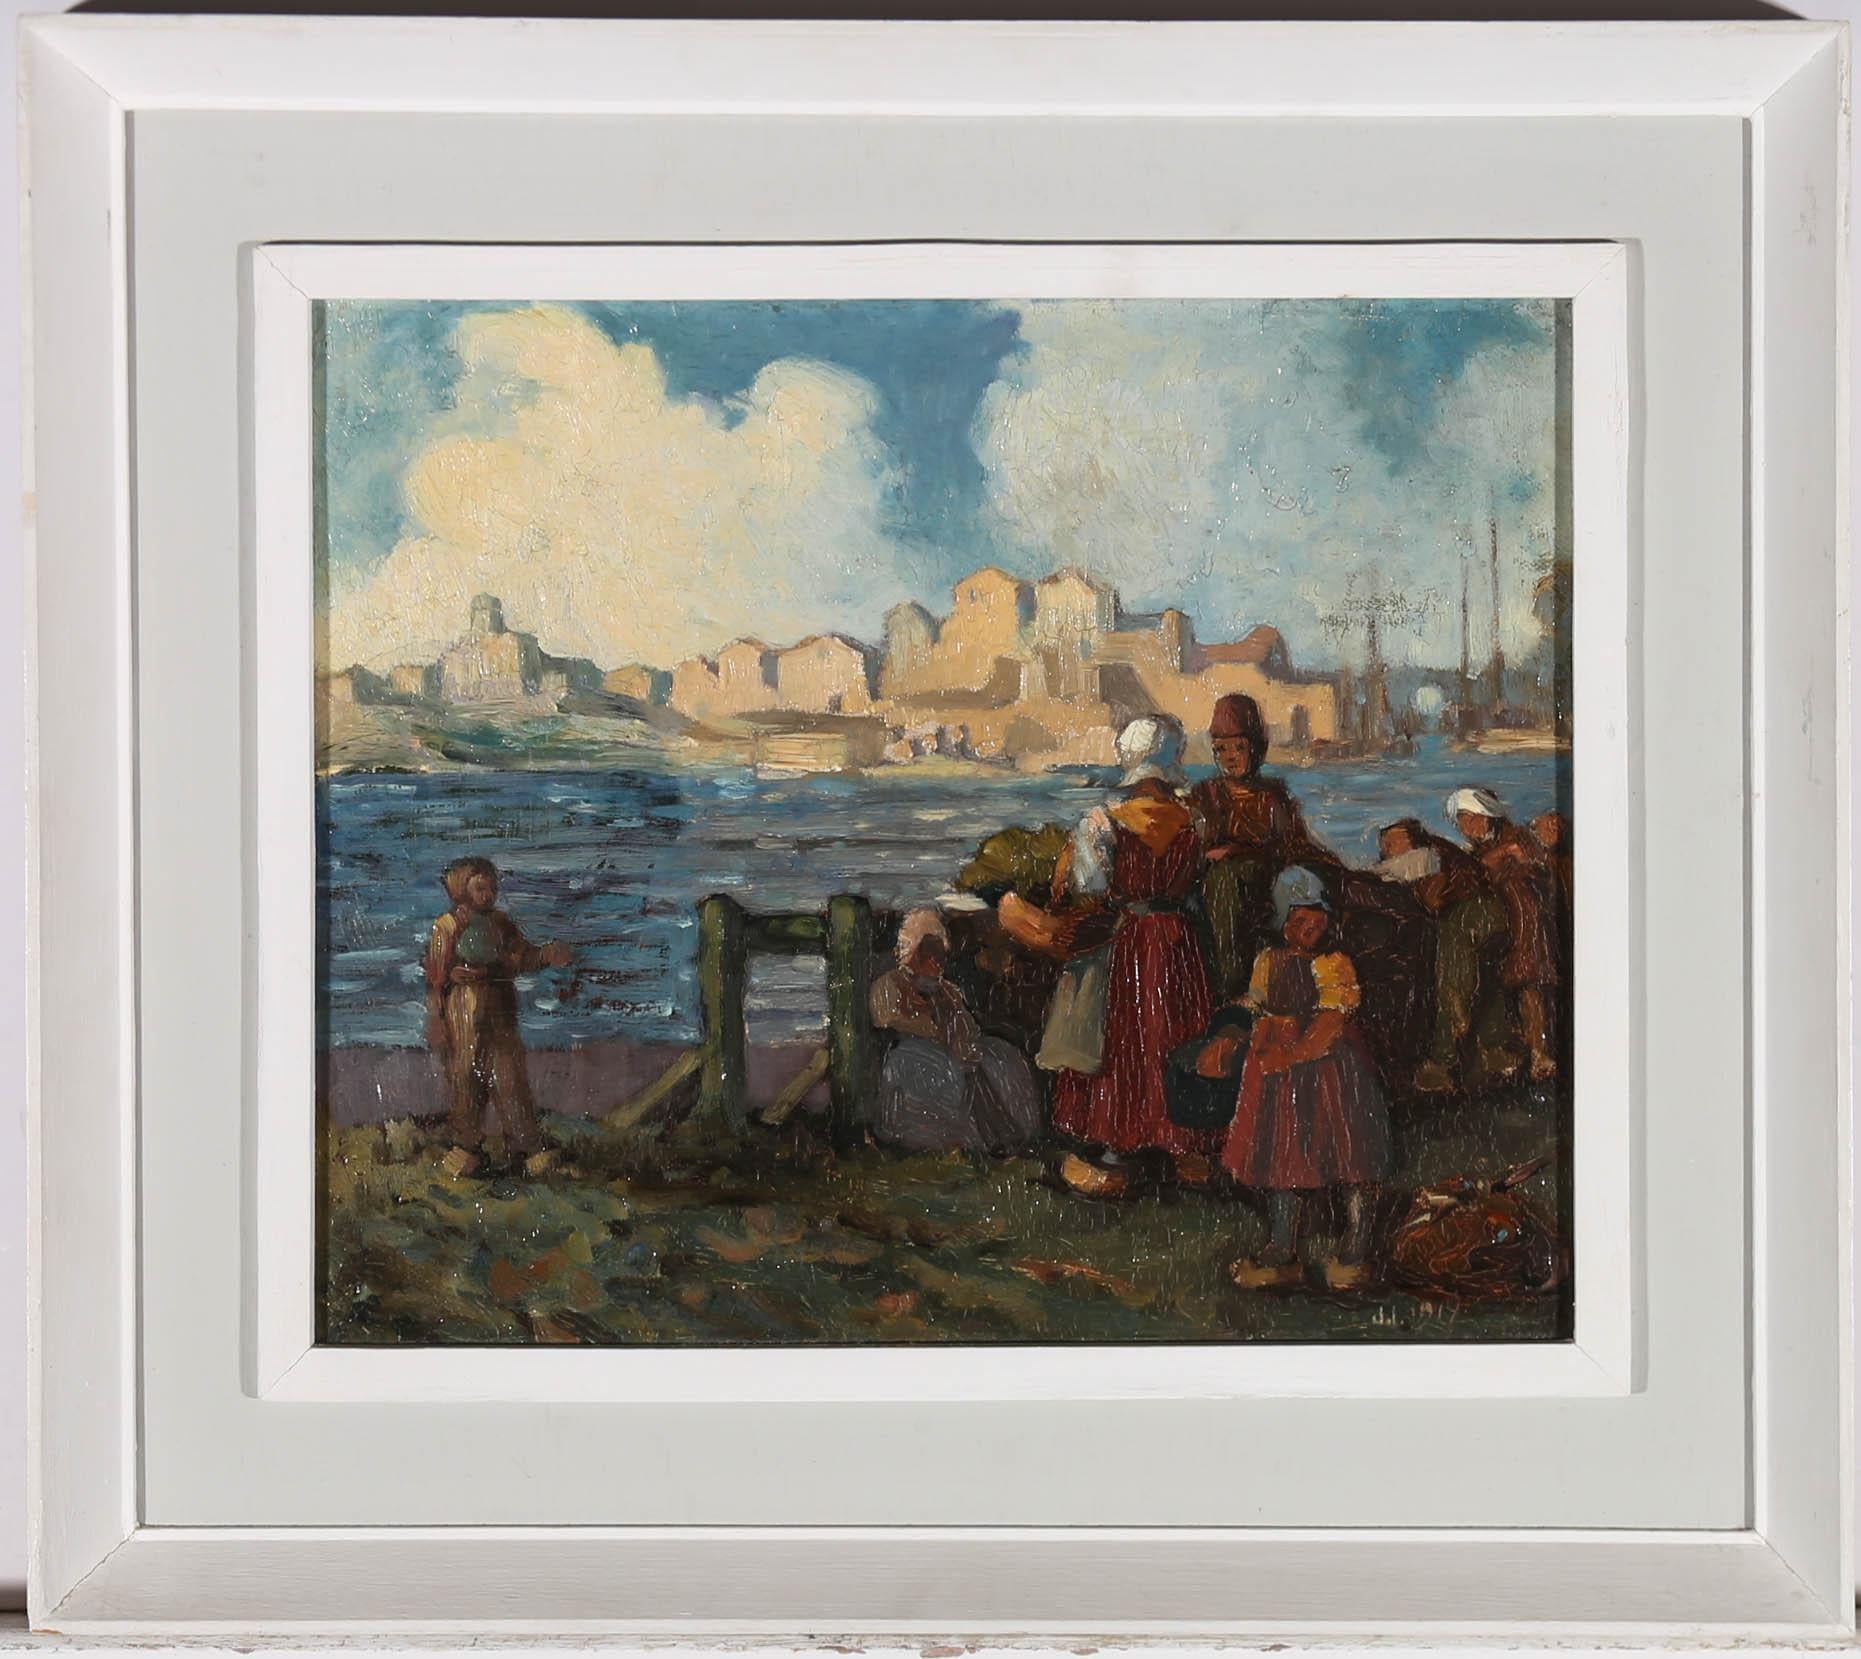 A charming Dutch harbour scene from the early 20th Century, showing a group of women and children, waiting at the edge of a sunlit harbour, for the fishing boats to return, with a distant town visible across the water. The artist has initialed